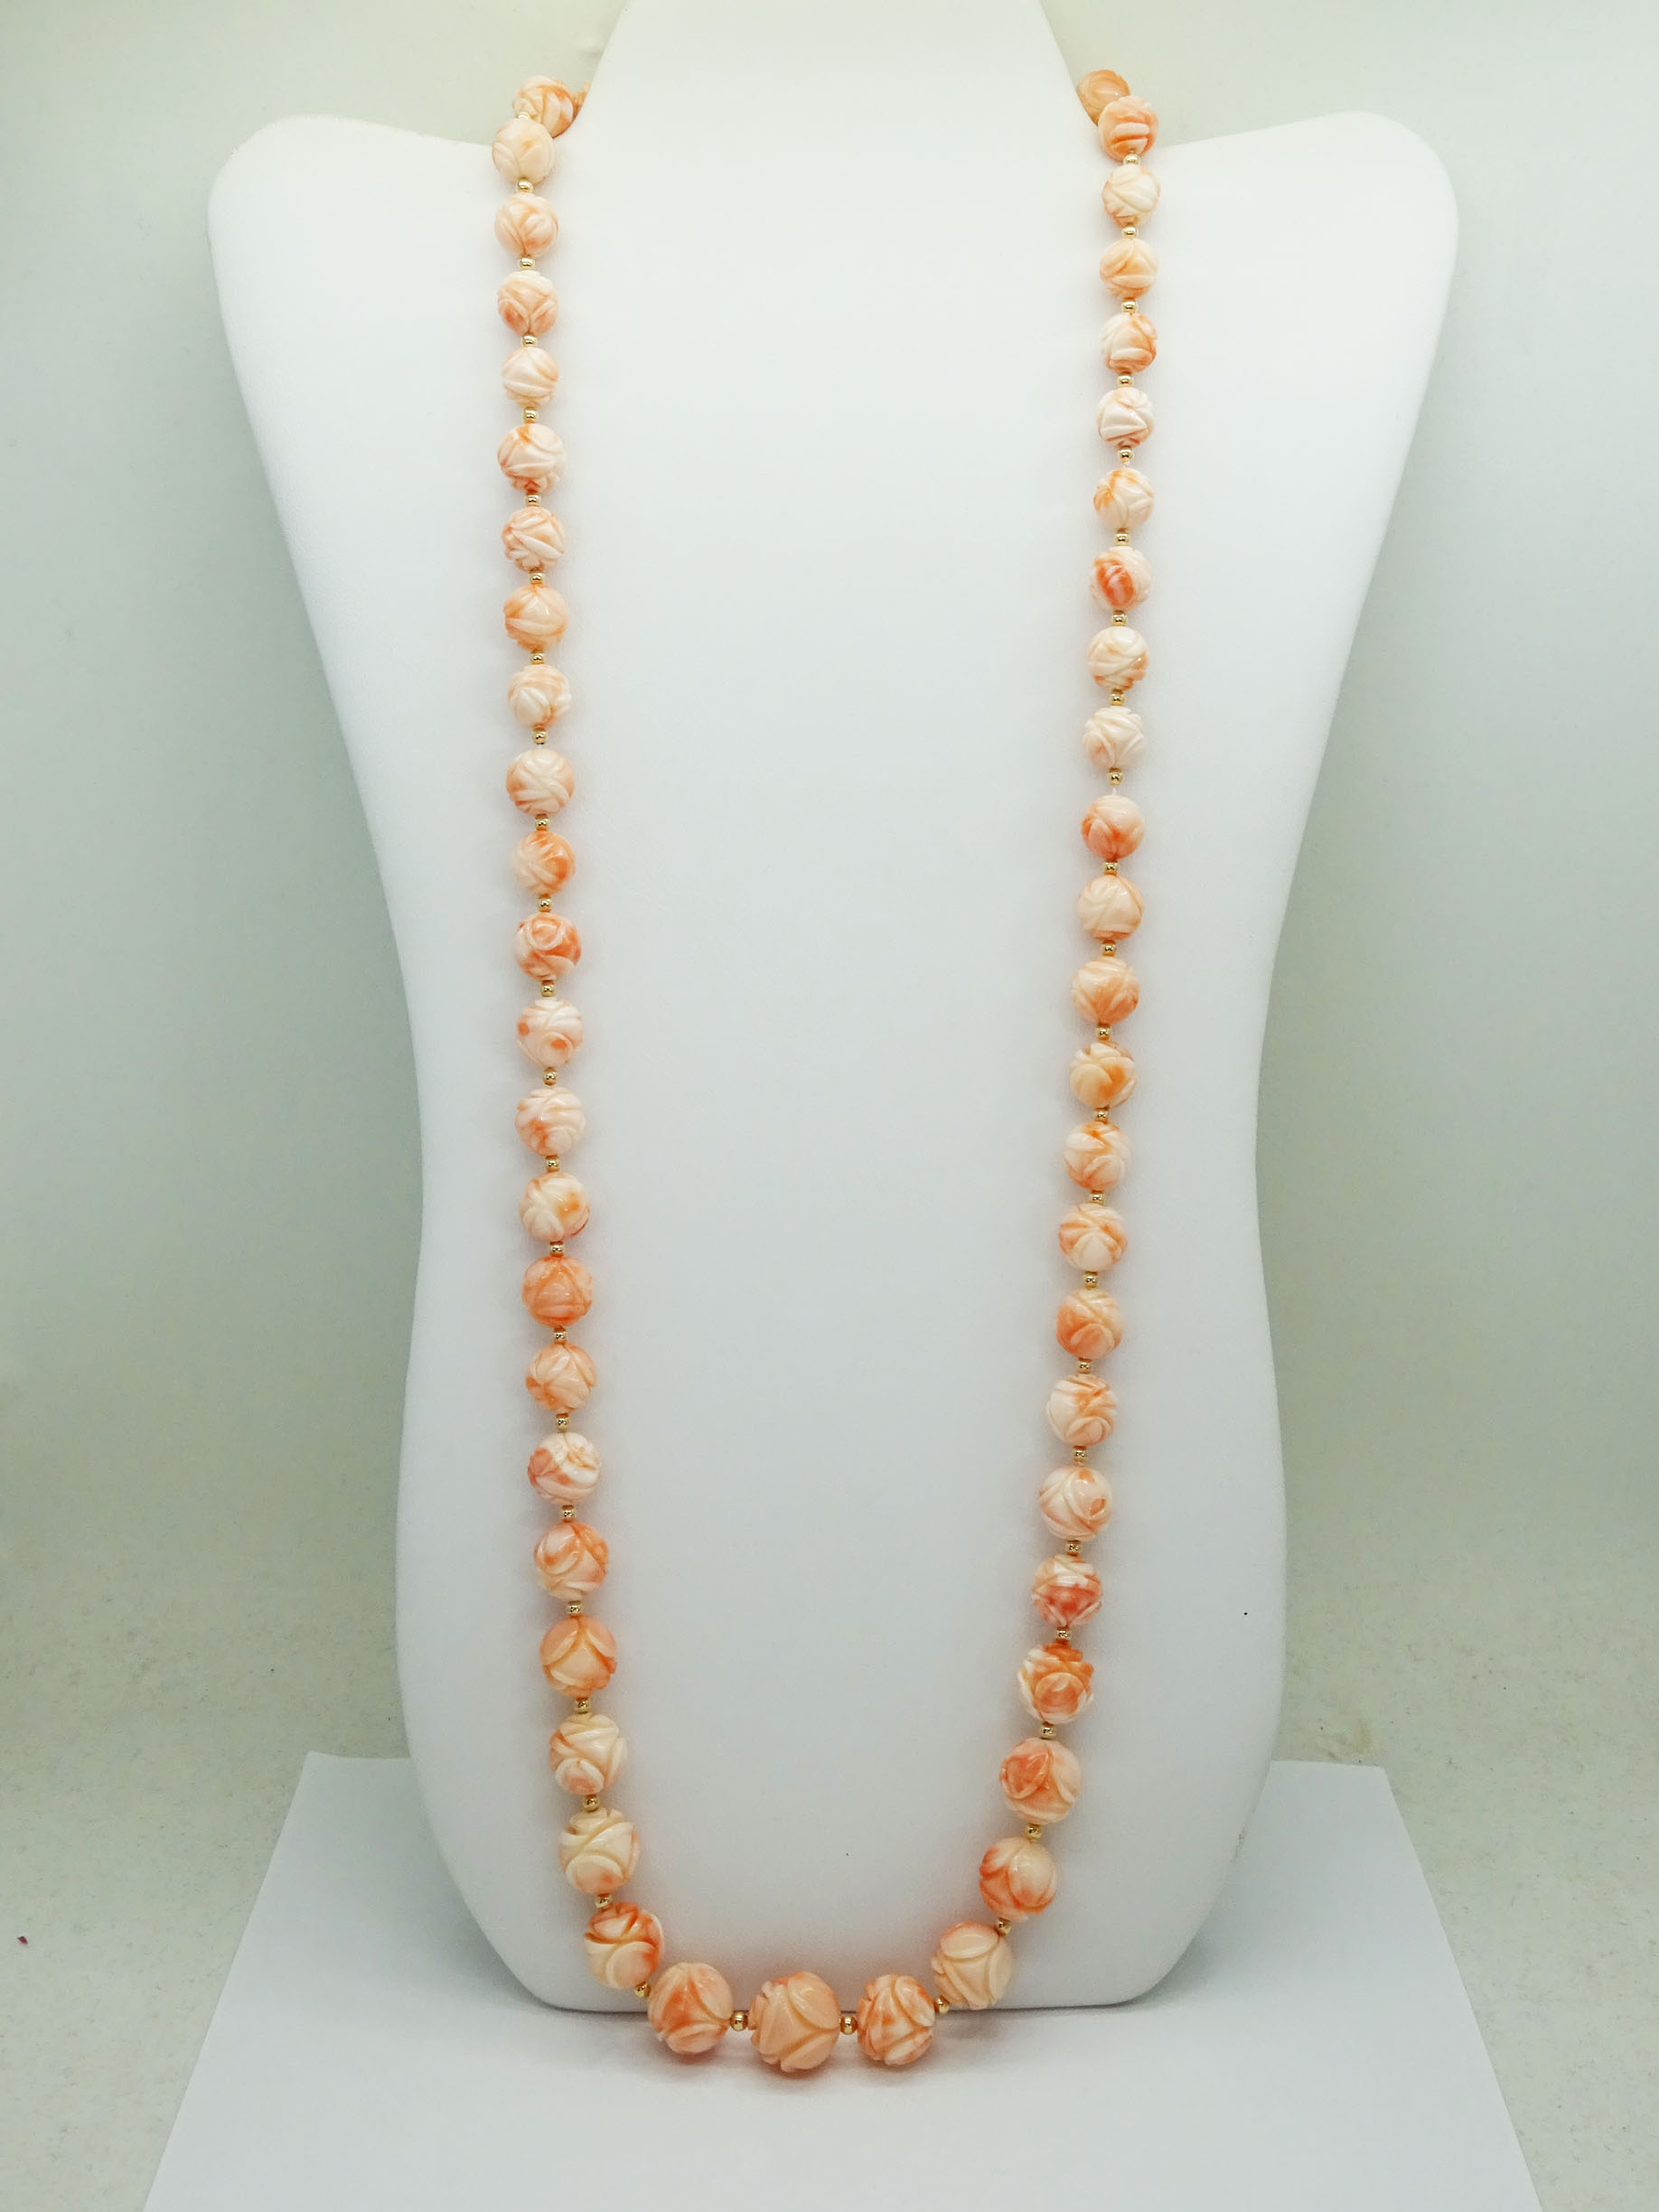 Long Rope Necklace Freshwater Pearls w/ Carved Jade Ends - Ruby Lane